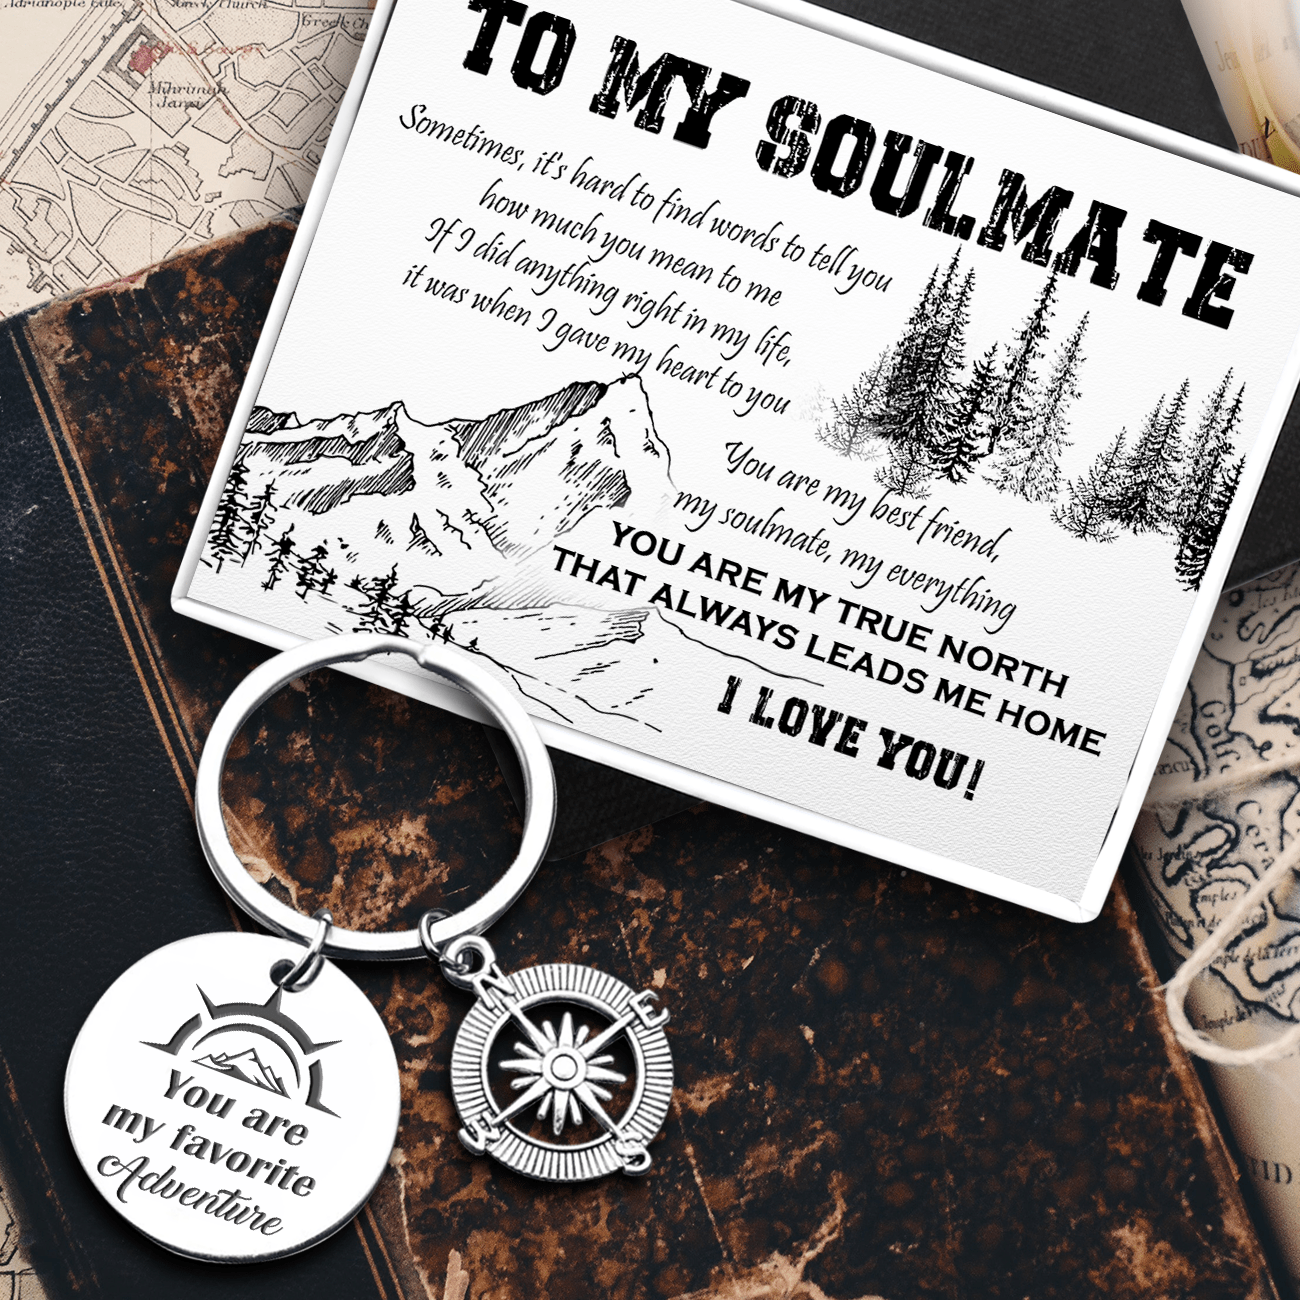 Compass Keychain - Hiking - To My Soulmate - You Are My True North That Always Leads Me Home - Gkw13020